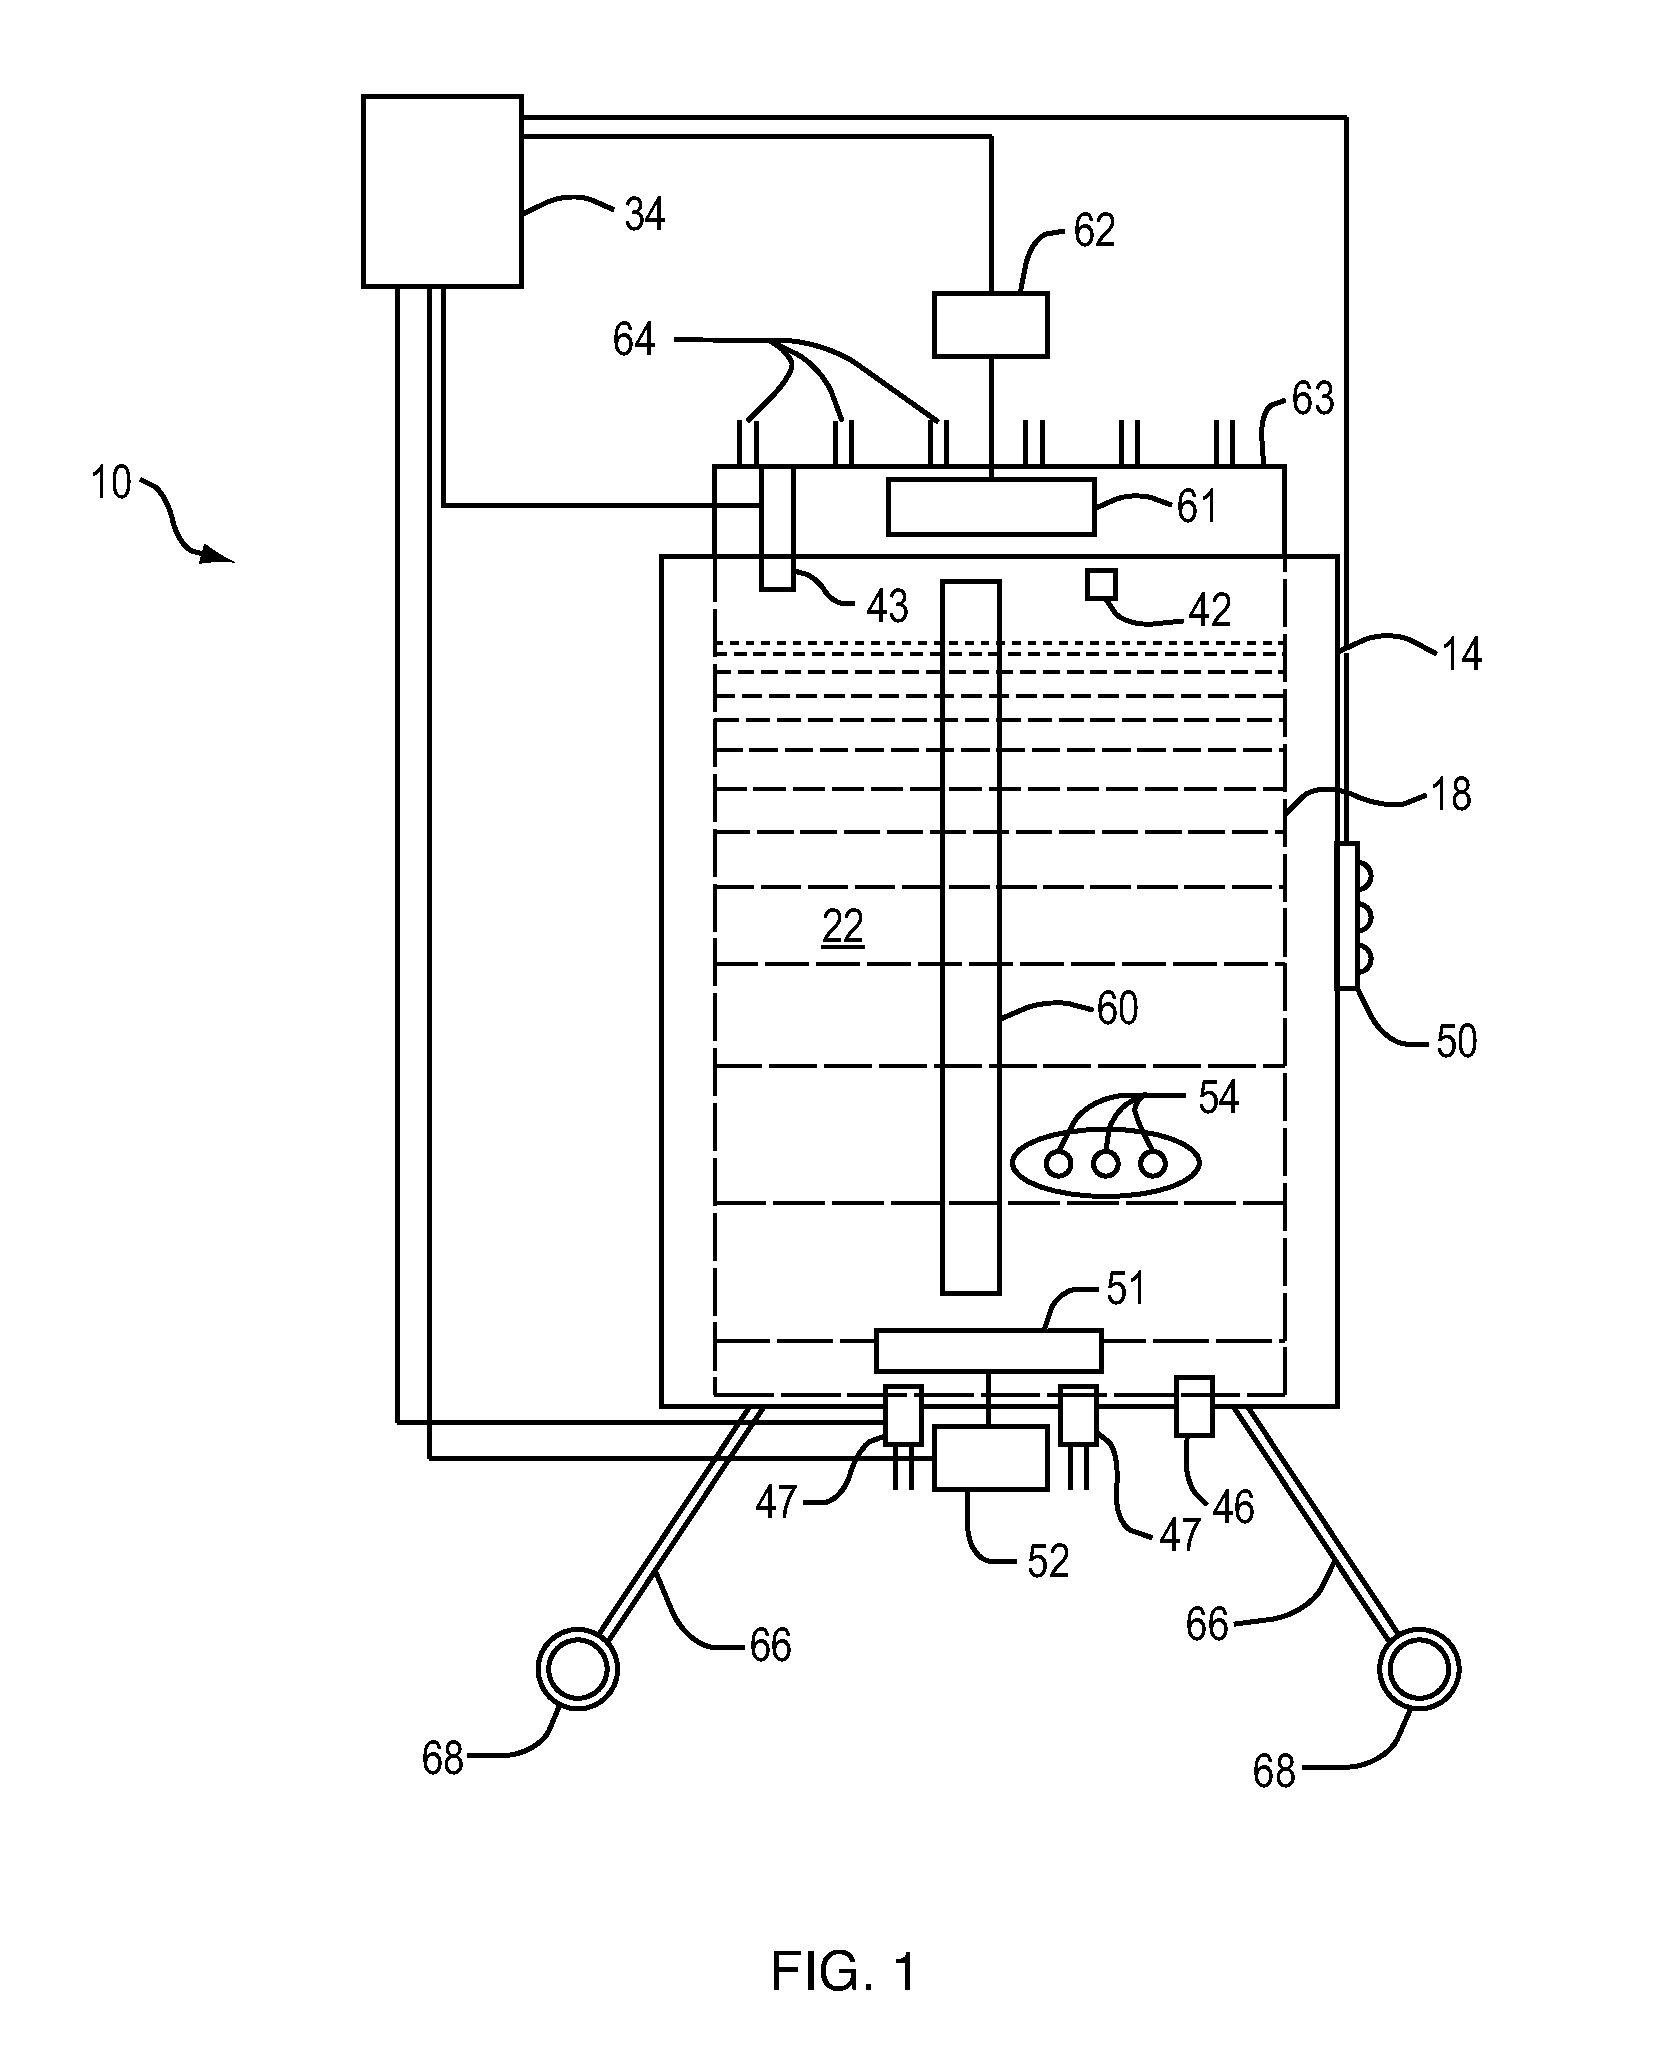 Temperature controlling surfaces and support structures